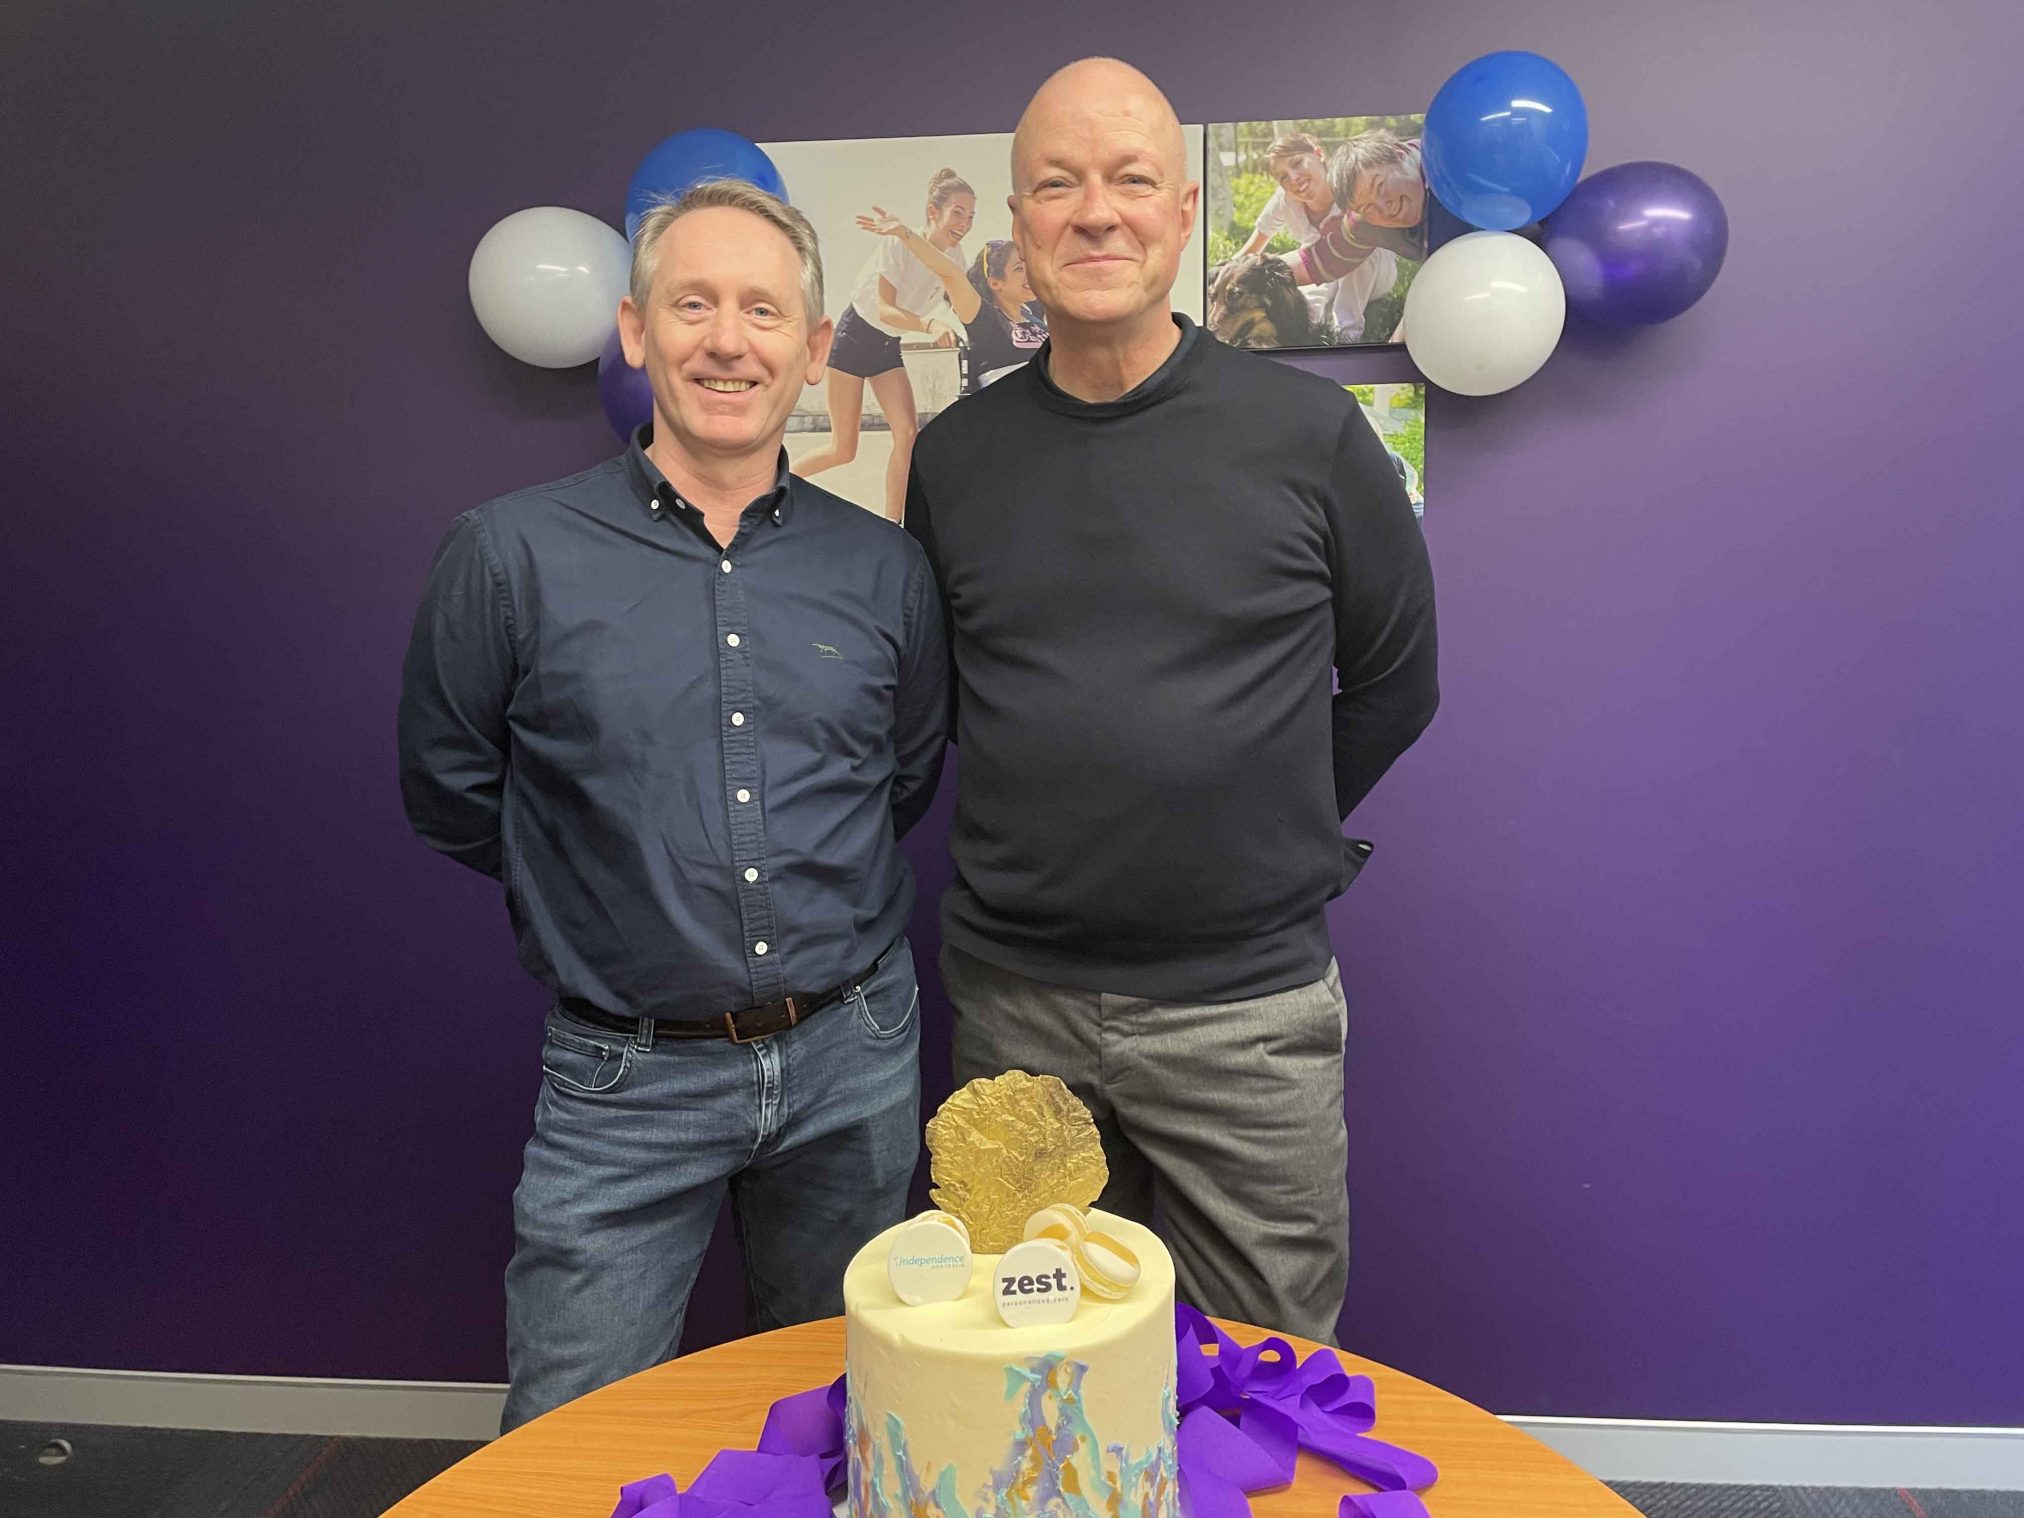 Two men smiling at the camera in front of balloons and purple wall.